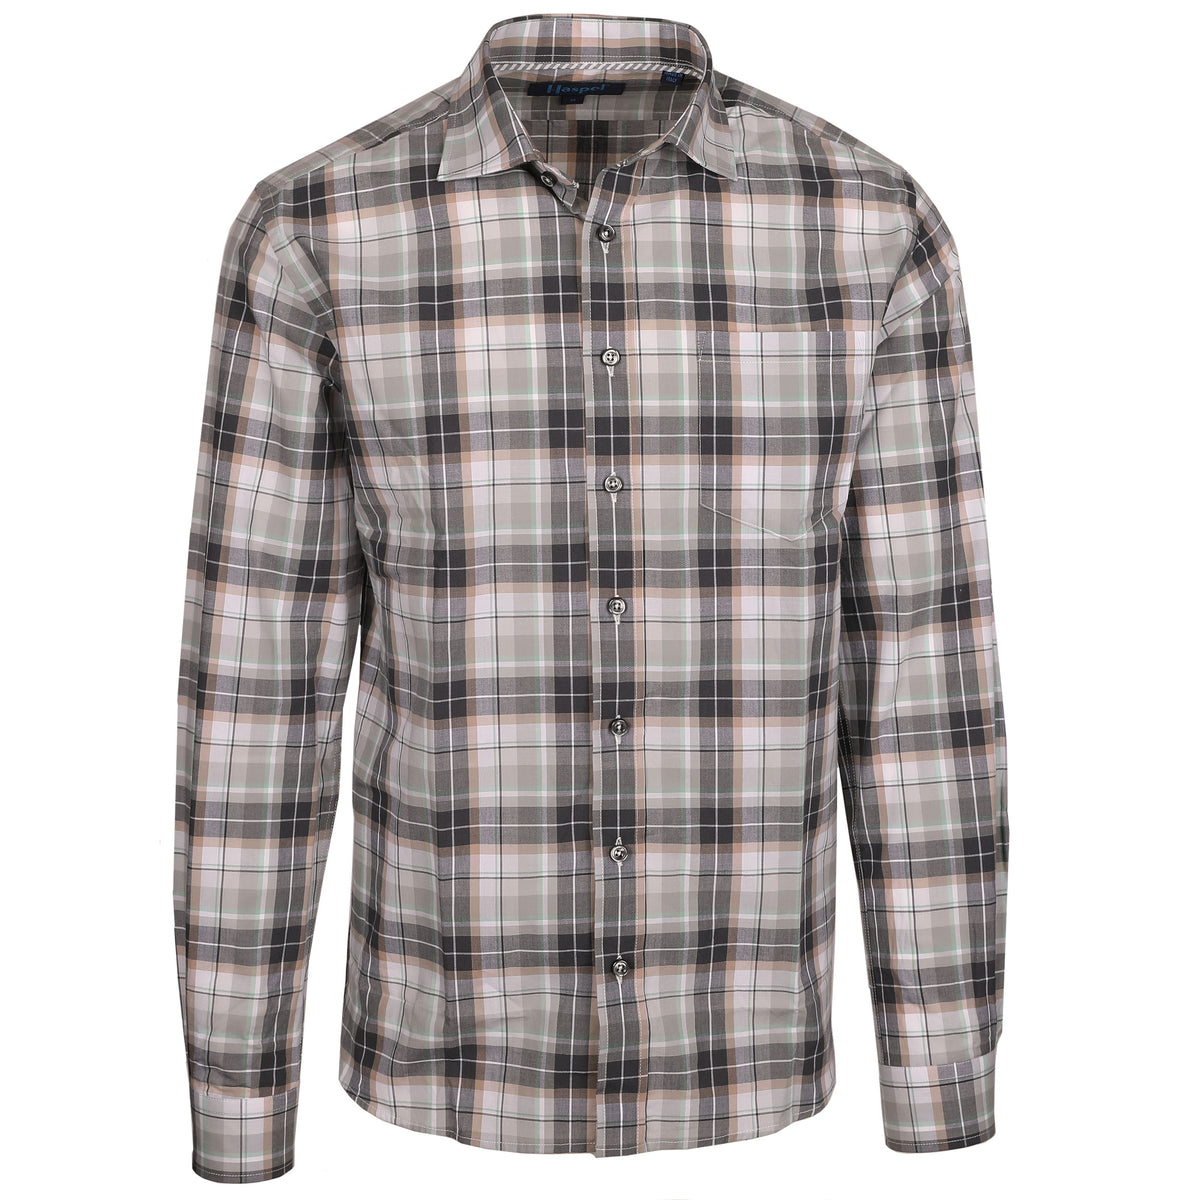 The Audubon Gray, Tan &amp; Green Plaid shirt adds a classic touch to any wardrobe. Crafted from lightweight cotton, this plaid shirt is comfortable and breathable. The stylishly designed steely grey buttons give a modern edge to the traditional grey and tan pattern.  100% Cotton • Spread Collar • Long Sleeve • Chest Pocket • Machine Washable • Made in Italy • Return Policy